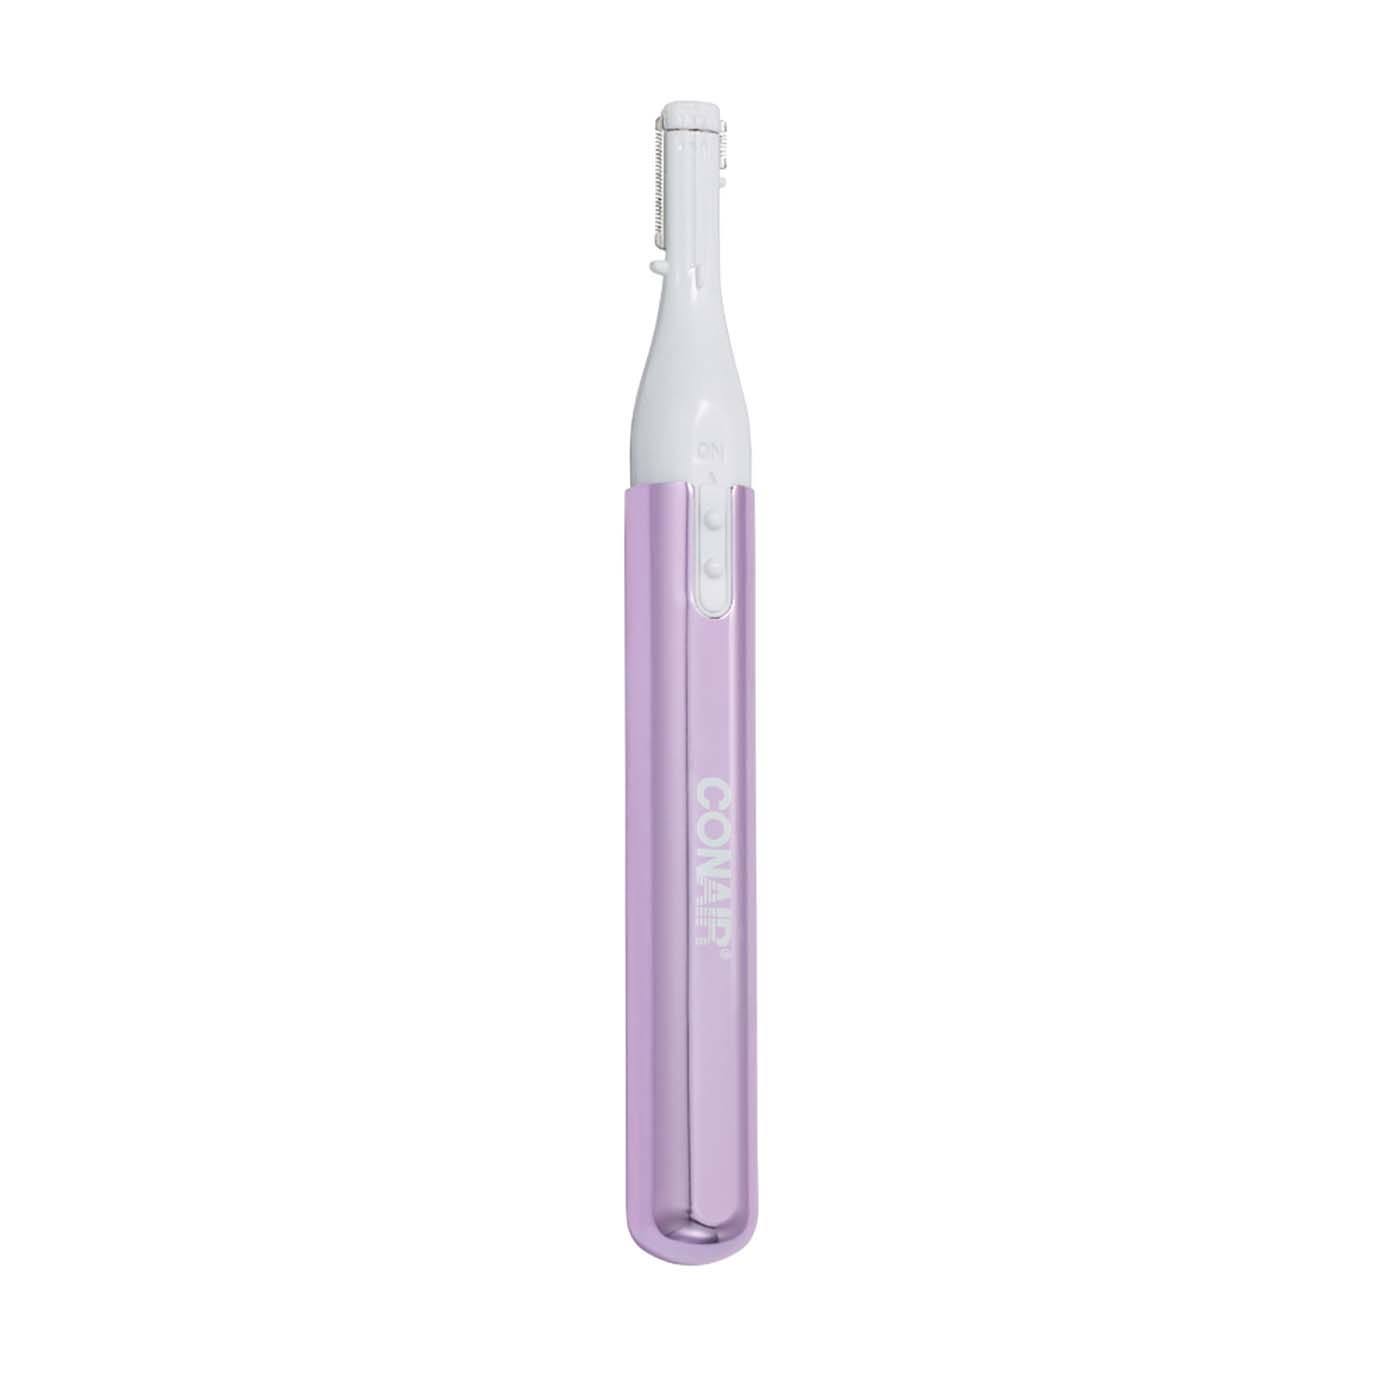 Conair 2 in 1 Fine Line Trimmer - Pink